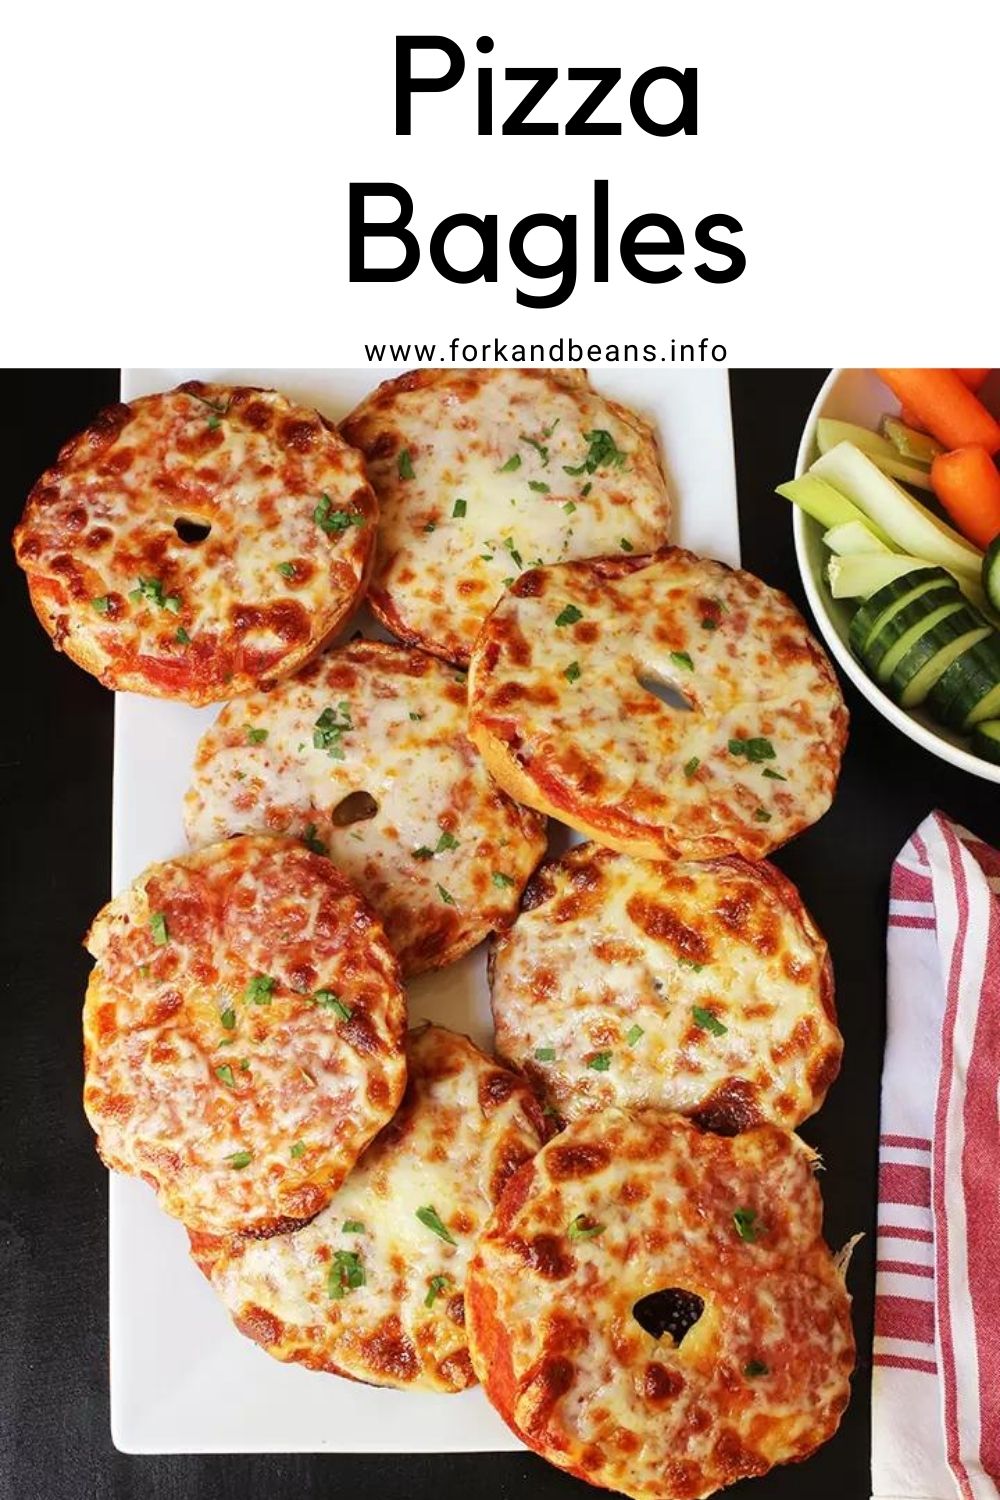 EASY HOMEMADE PIZZA BAGELS RECIPE